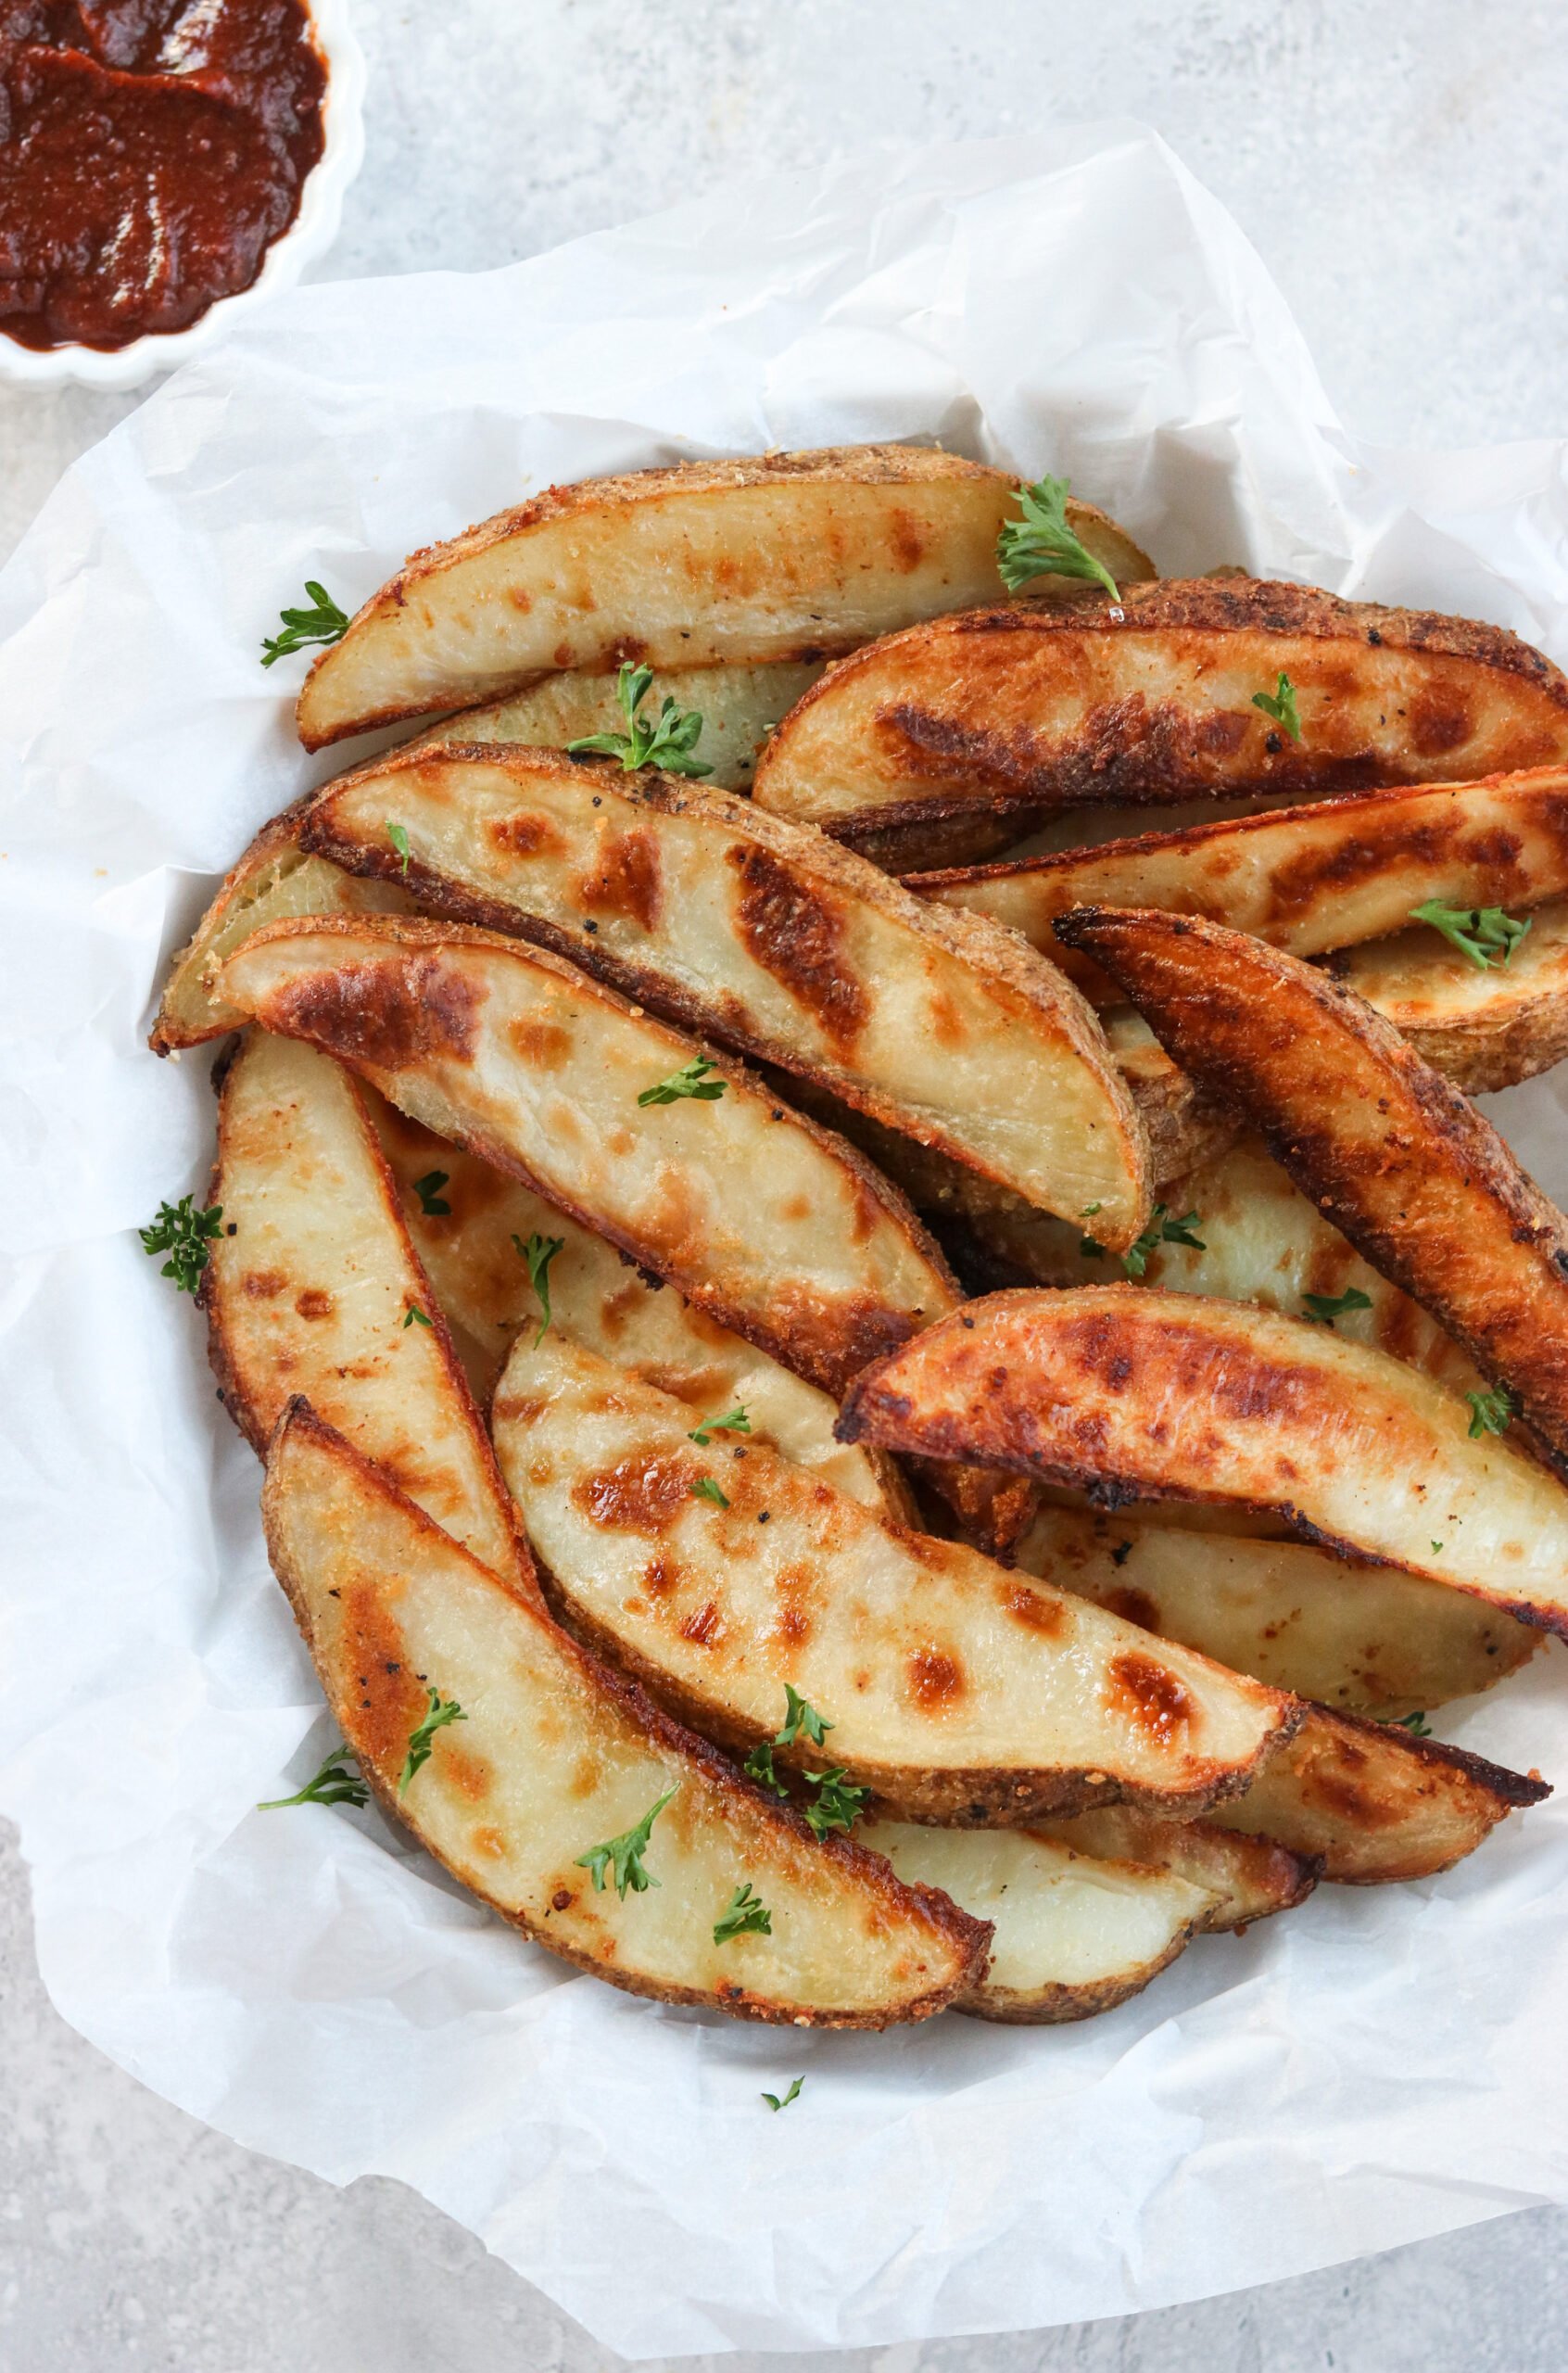 Crispy Baked Potato Wedges with sauce